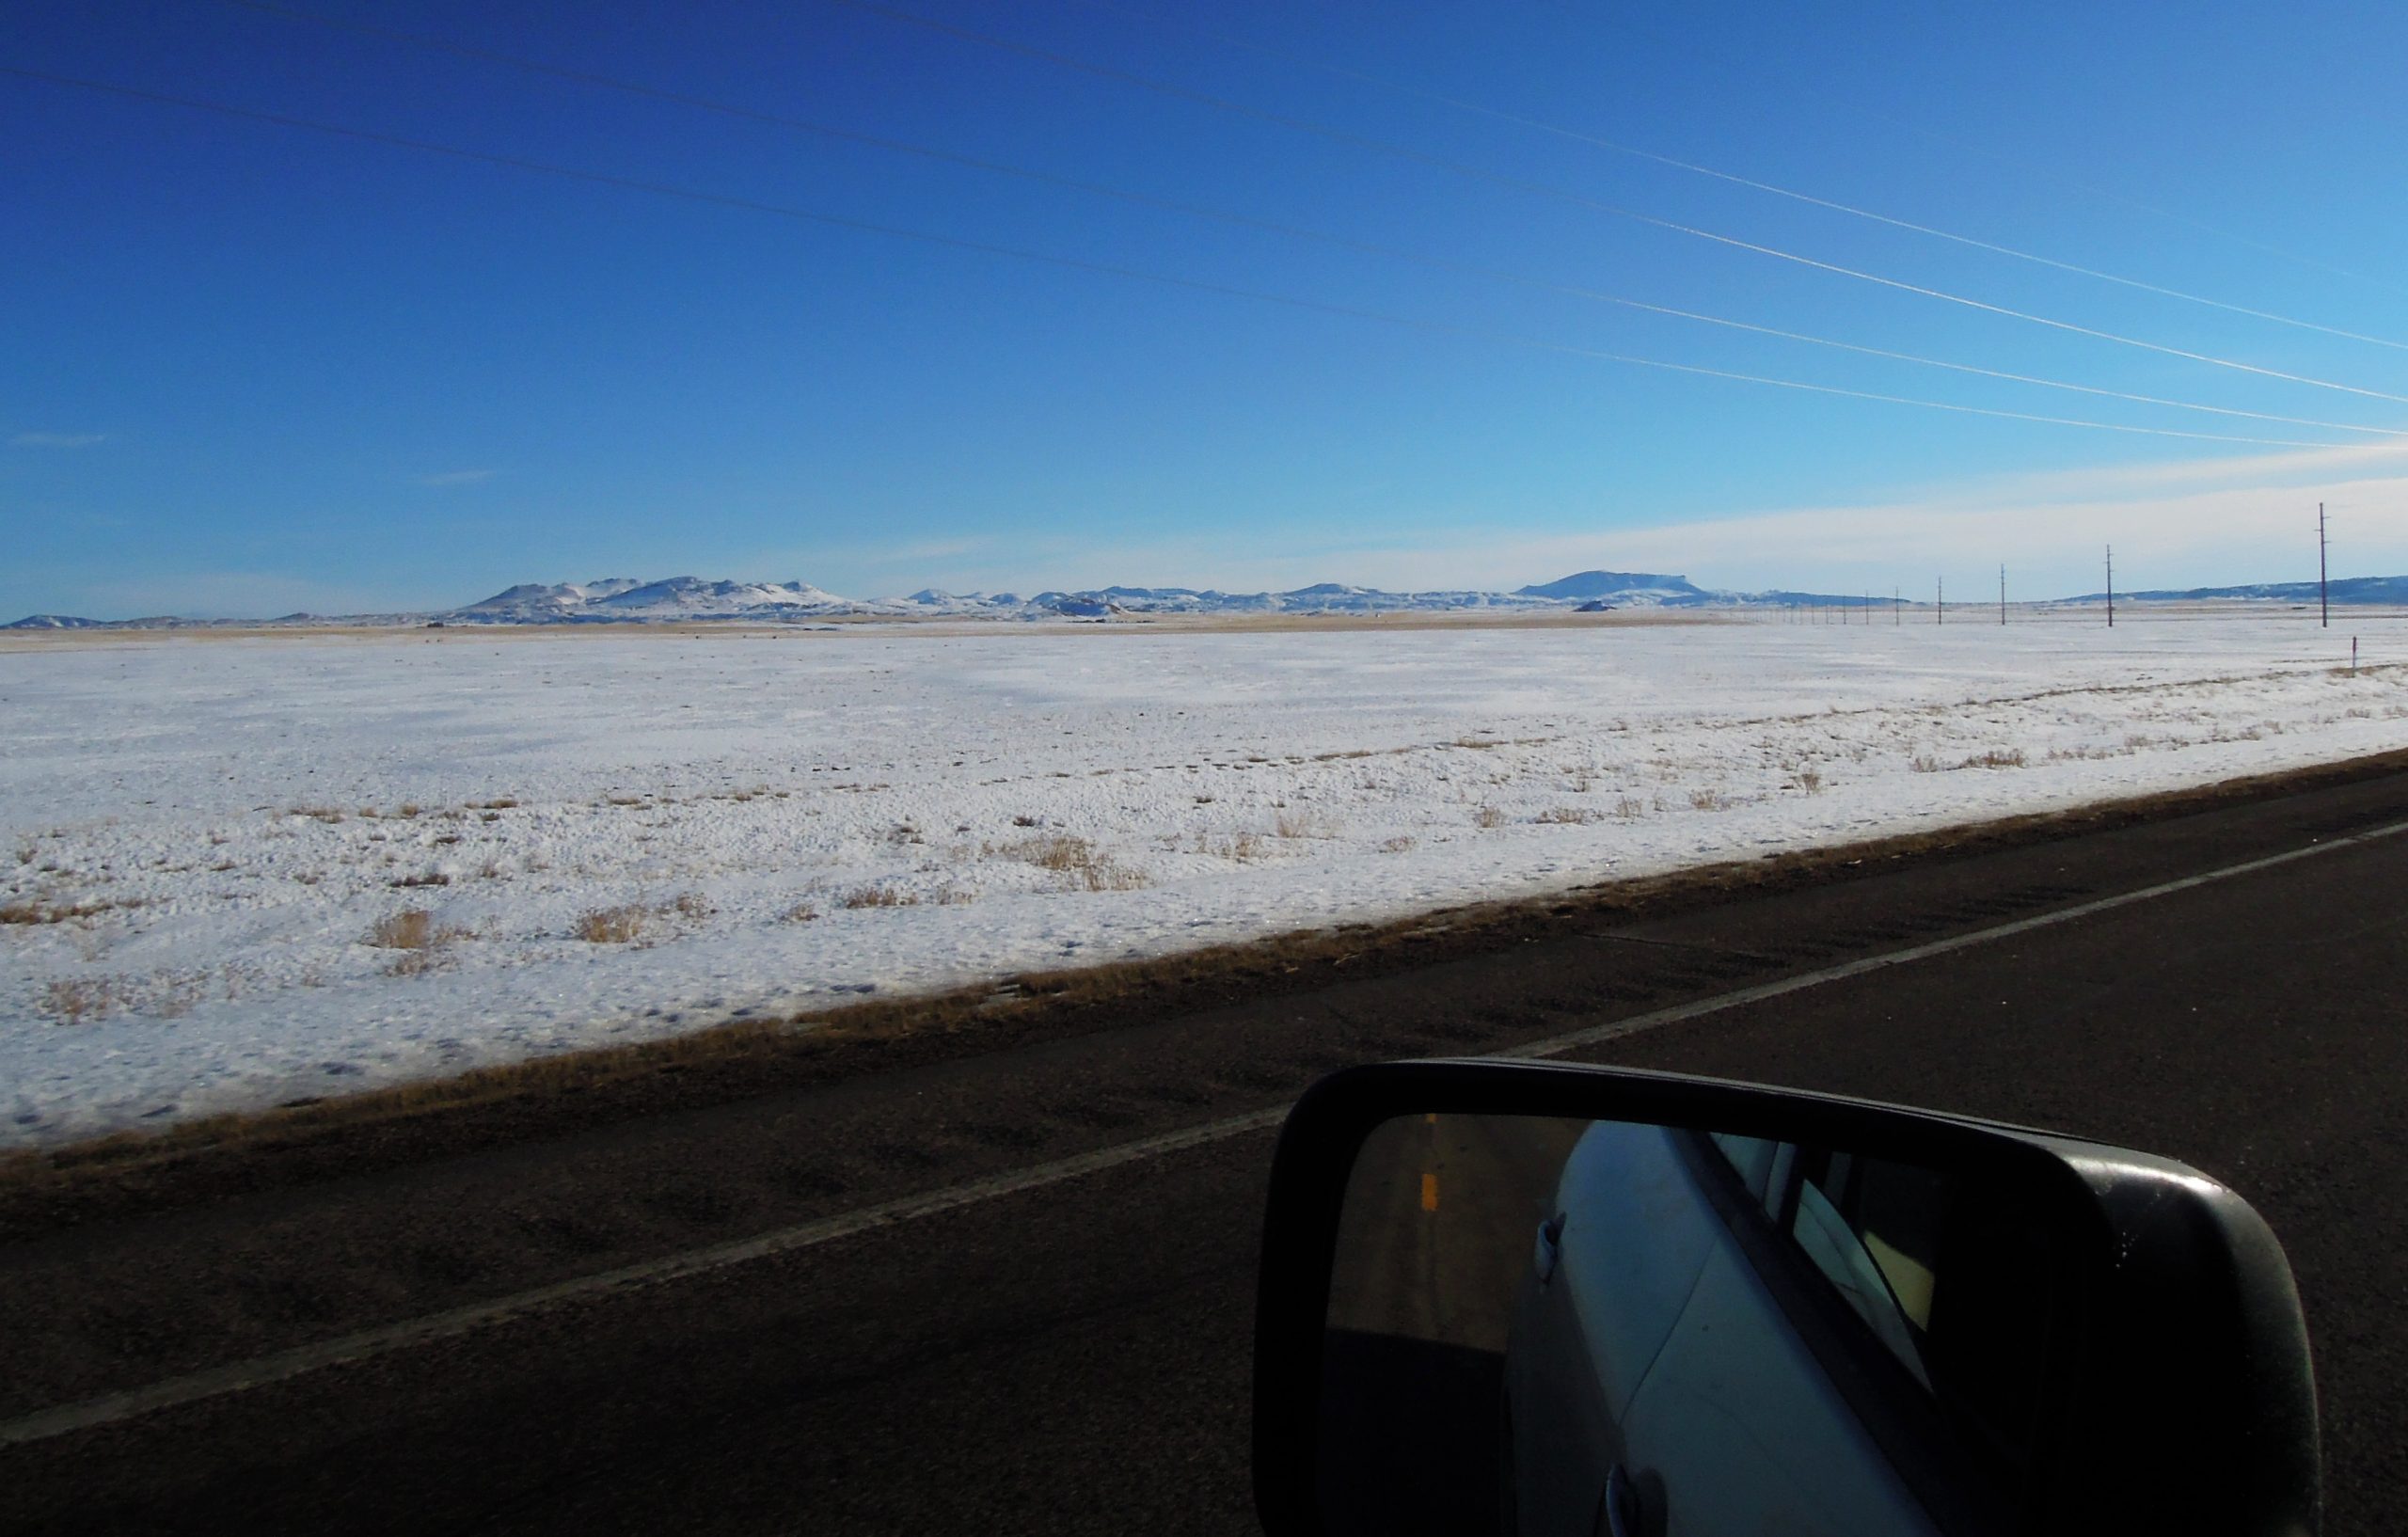 View of a snow-covered Montana landscape.